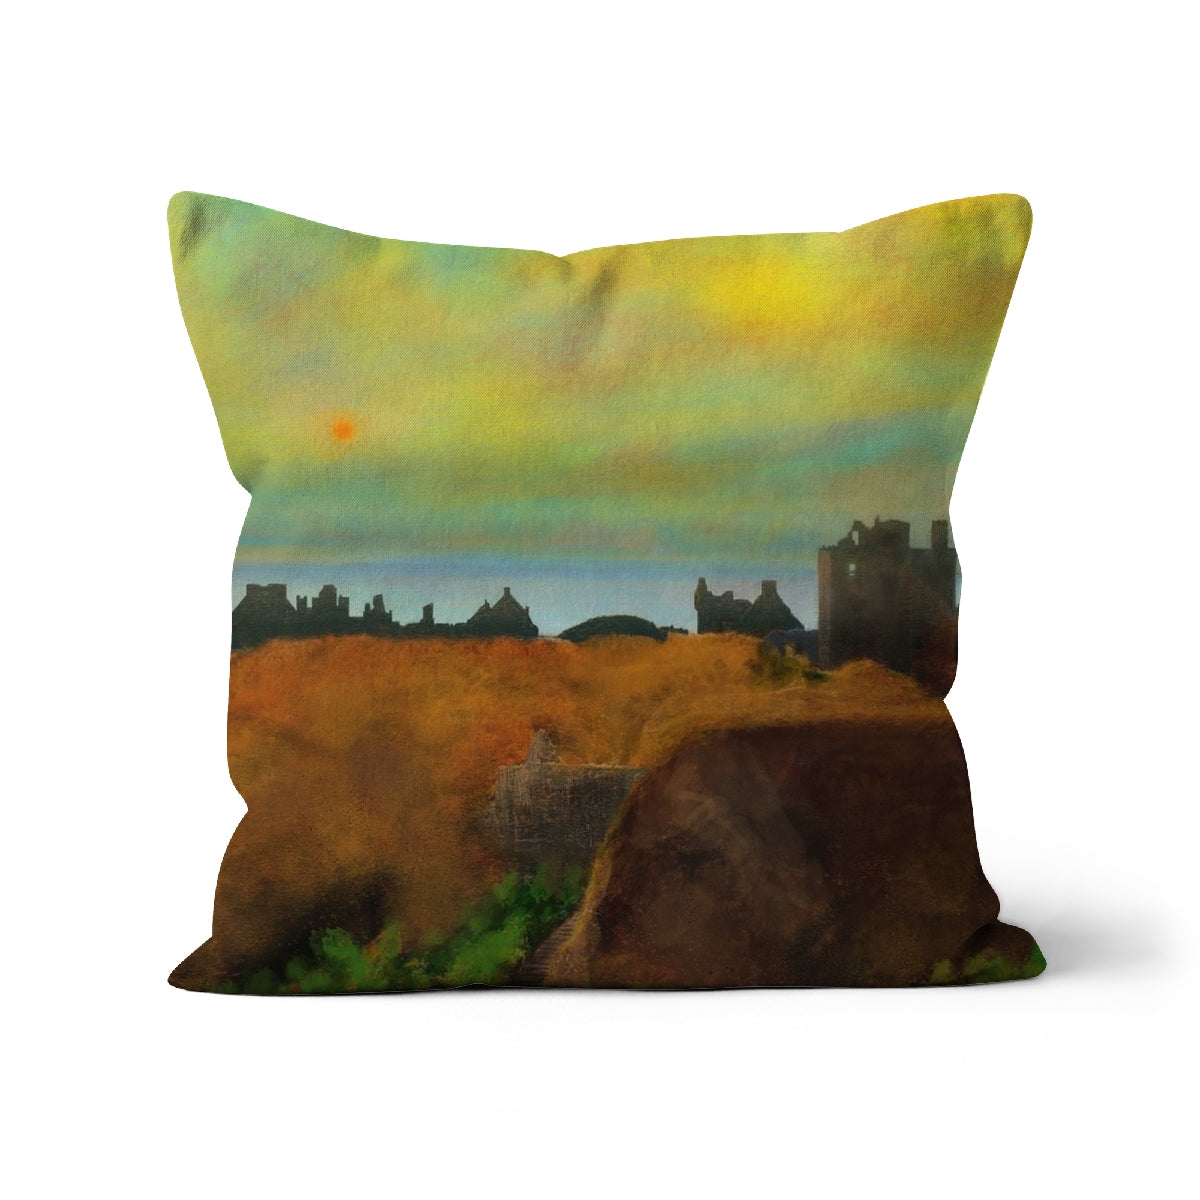 Dunnottar Castle Art Gifts Cushion-Cushions-Historic & Iconic Scotland Art Gallery-Canvas-22"x22"-Paintings, Prints, Homeware, Art Gifts From Scotland By Scottish Artist Kevin Hunter